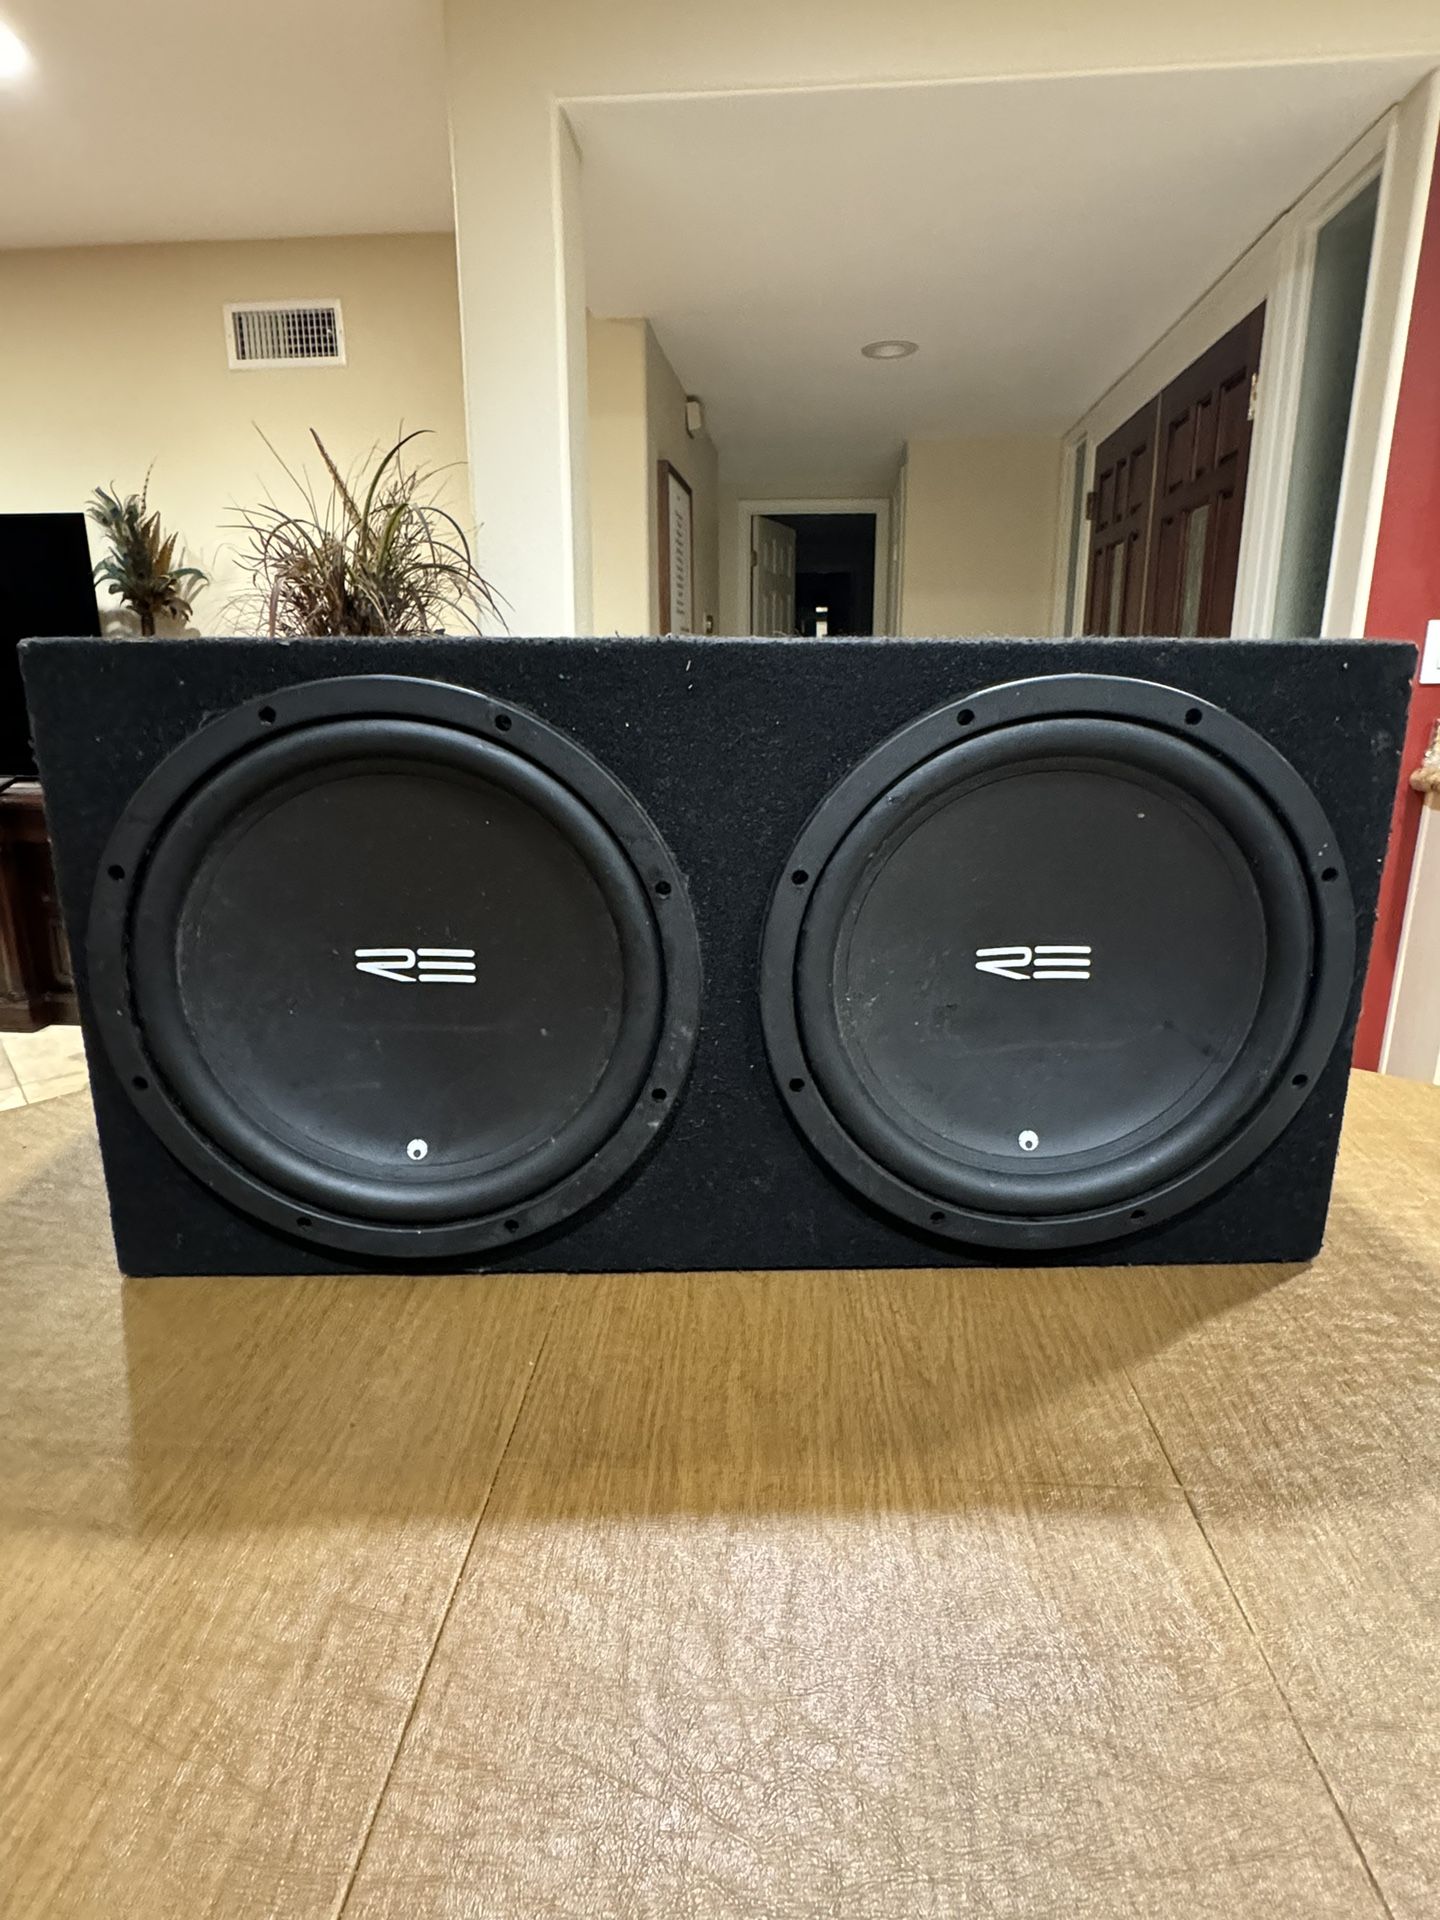 Twin RE Audio 12 “ Subwoofers Boom Boxed 28 X 14 X 14